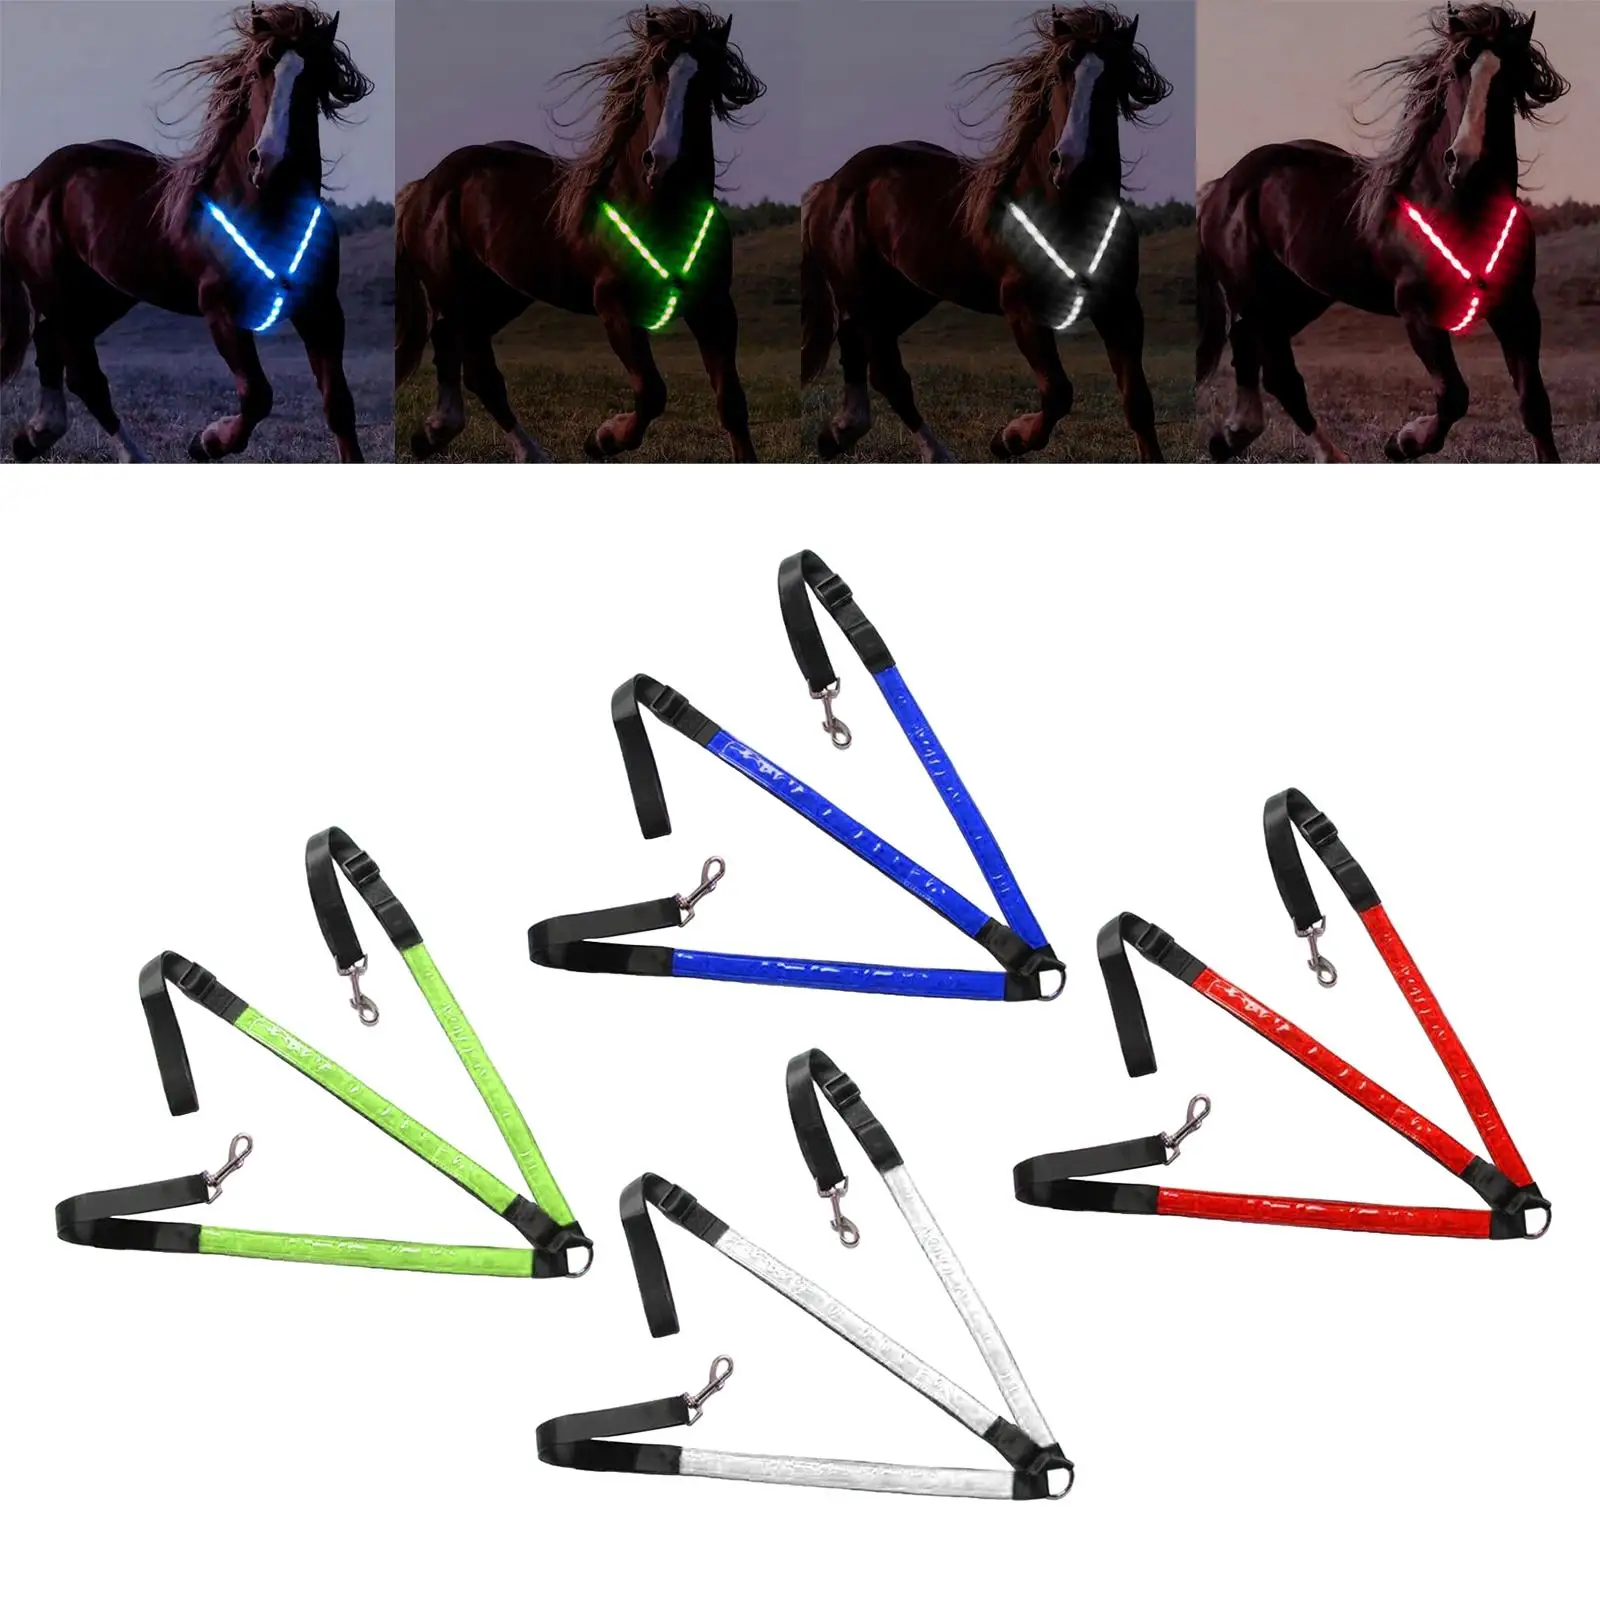 LED Horse Breastplate Collar Adjustable Equestrian Safety Equipment Night Visible Tack Night Safety Light for Horseback Riding